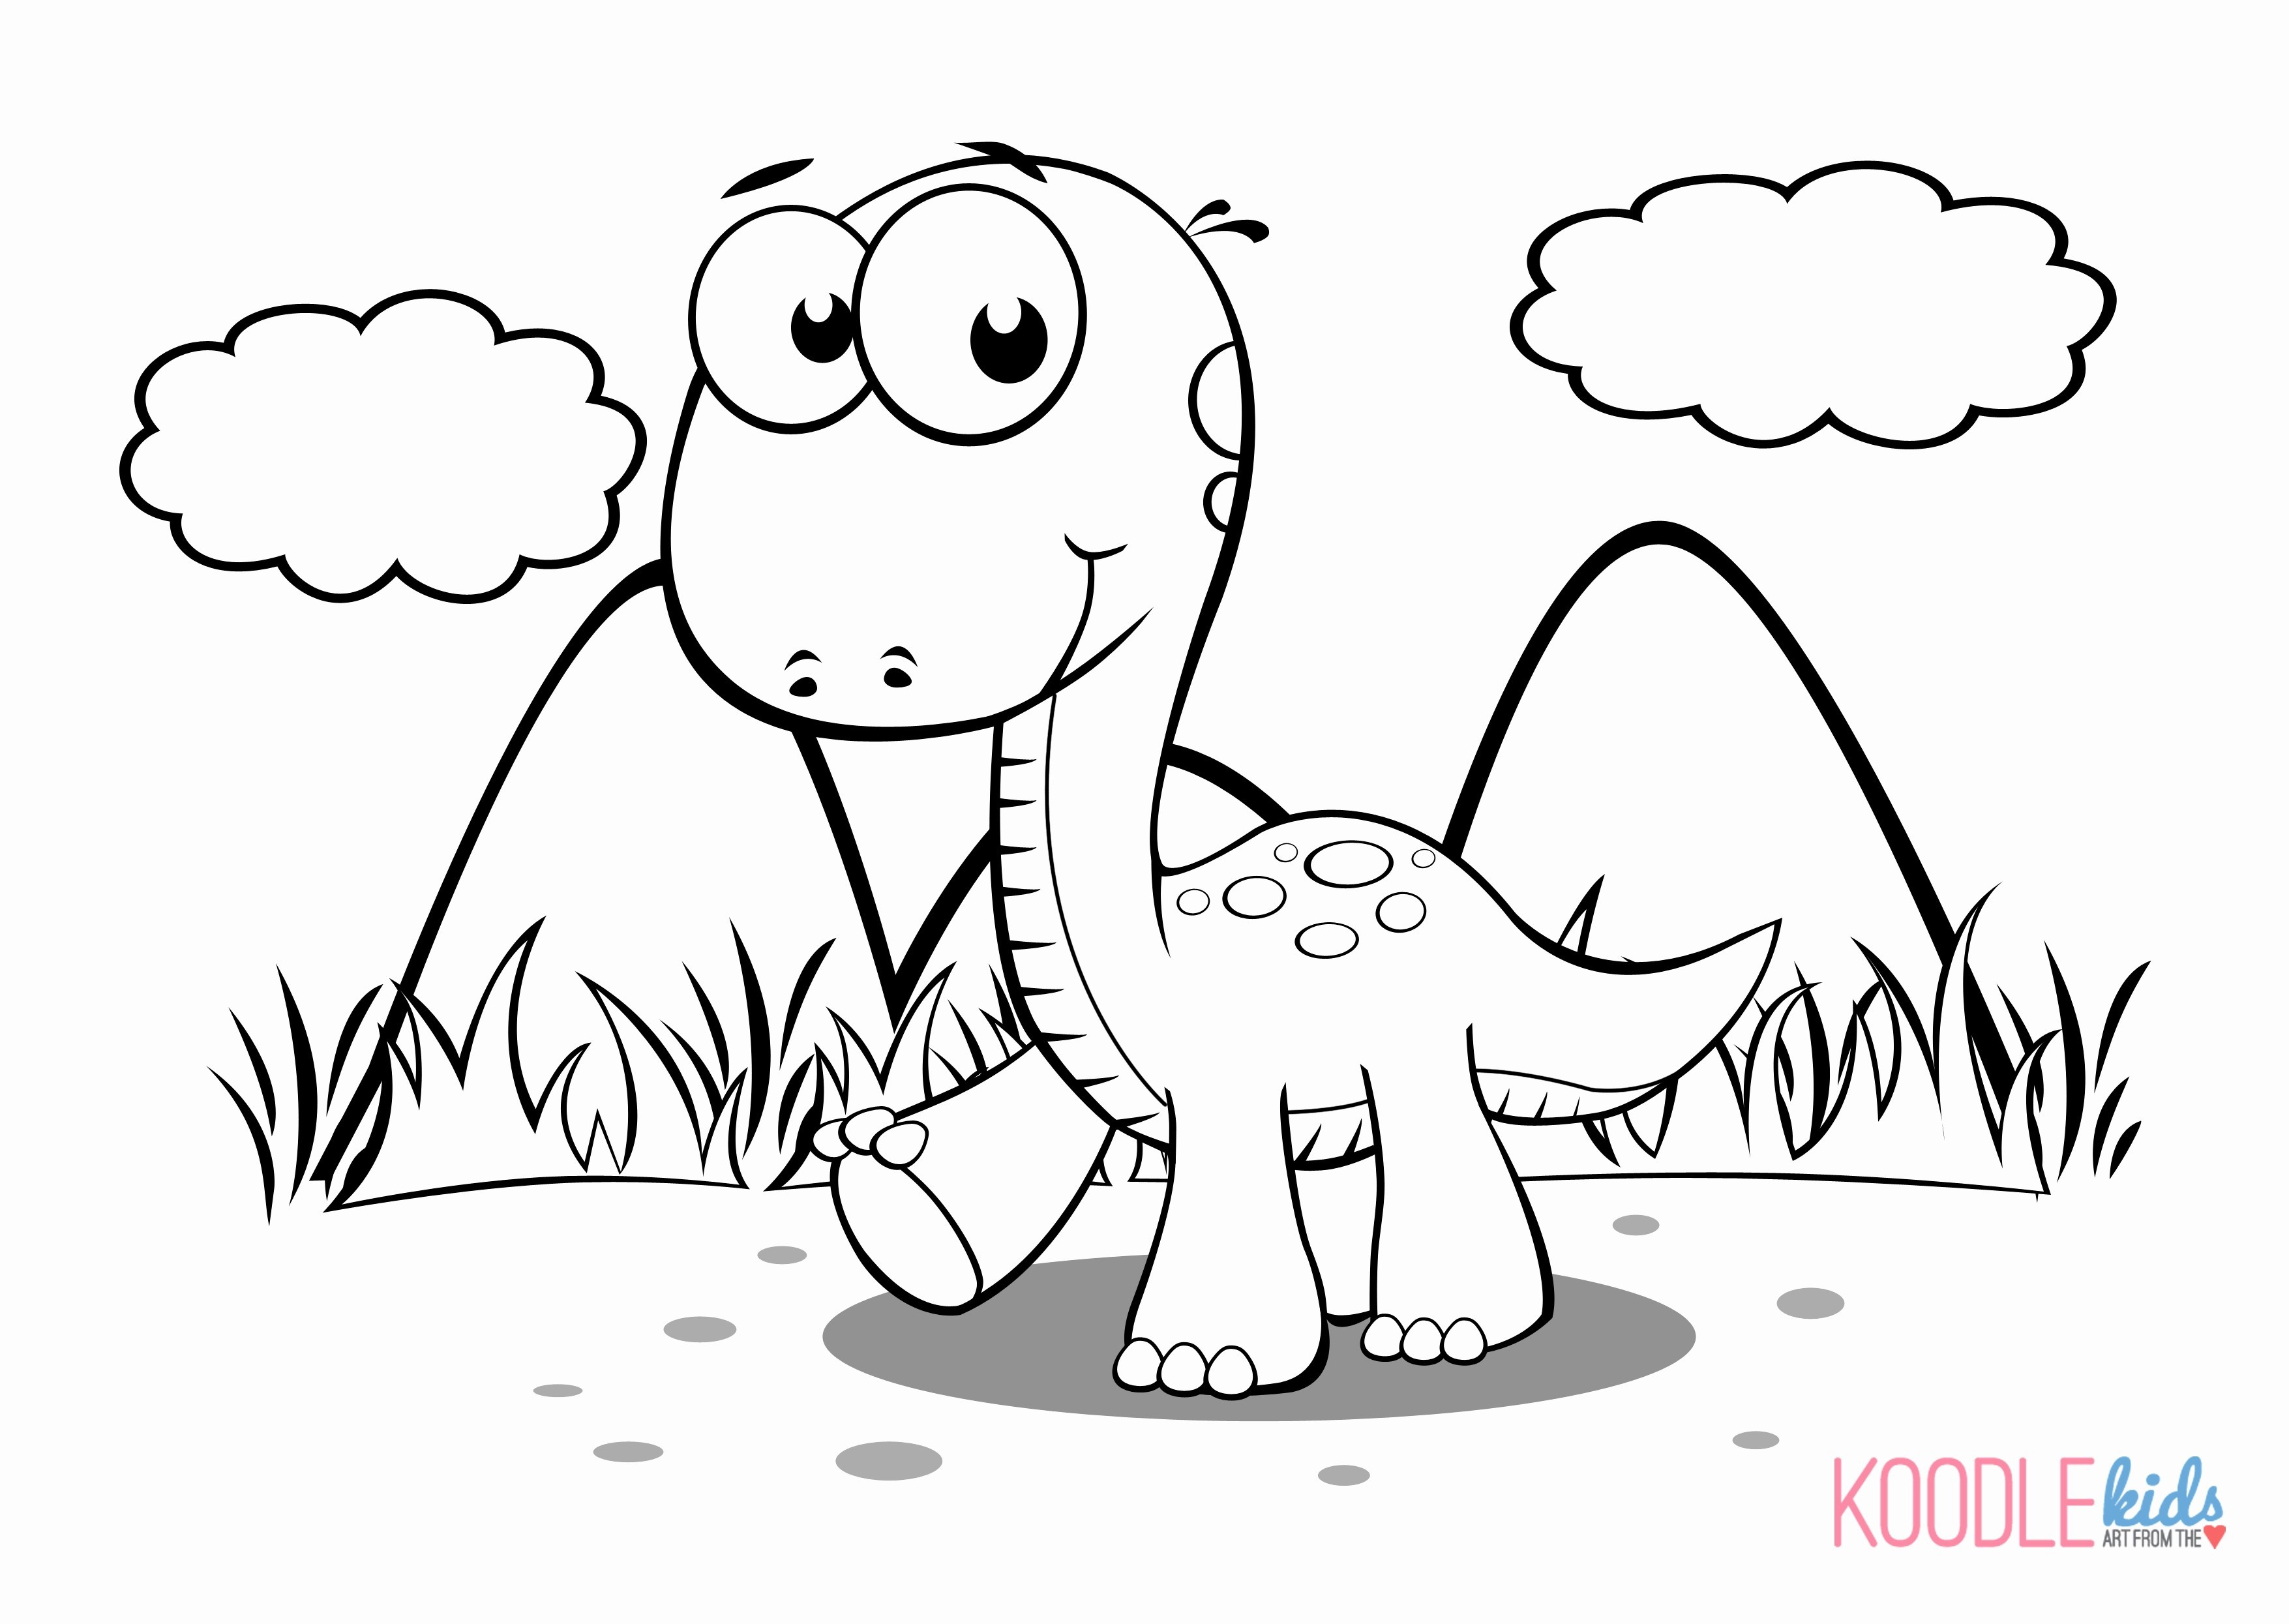 Free Dinosaur Coloring Pages Pdf Awesome Animal Coloring Pages Pdf Beautiful Dinosaur Page Printable Image